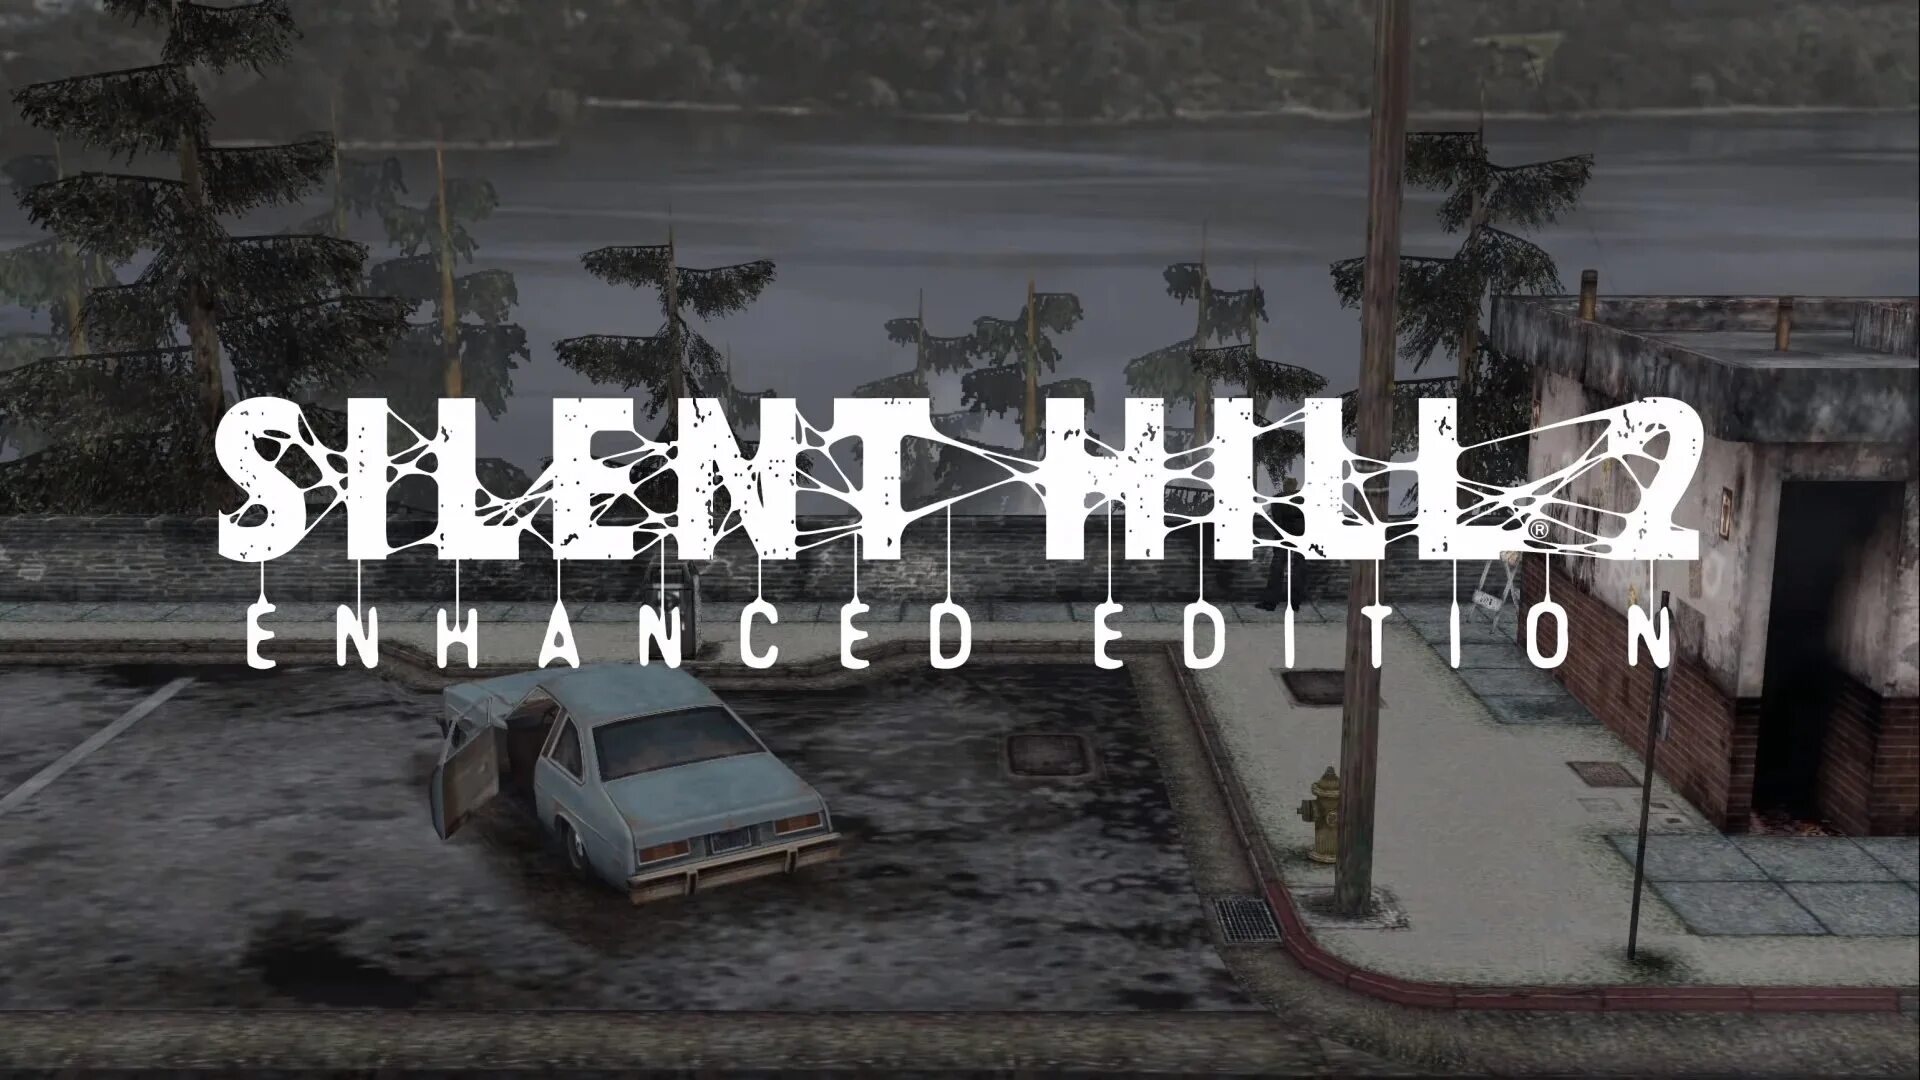 Silent hill new edition. Silent Hill 2 Director's Cut New Edition: enhanced Edition.